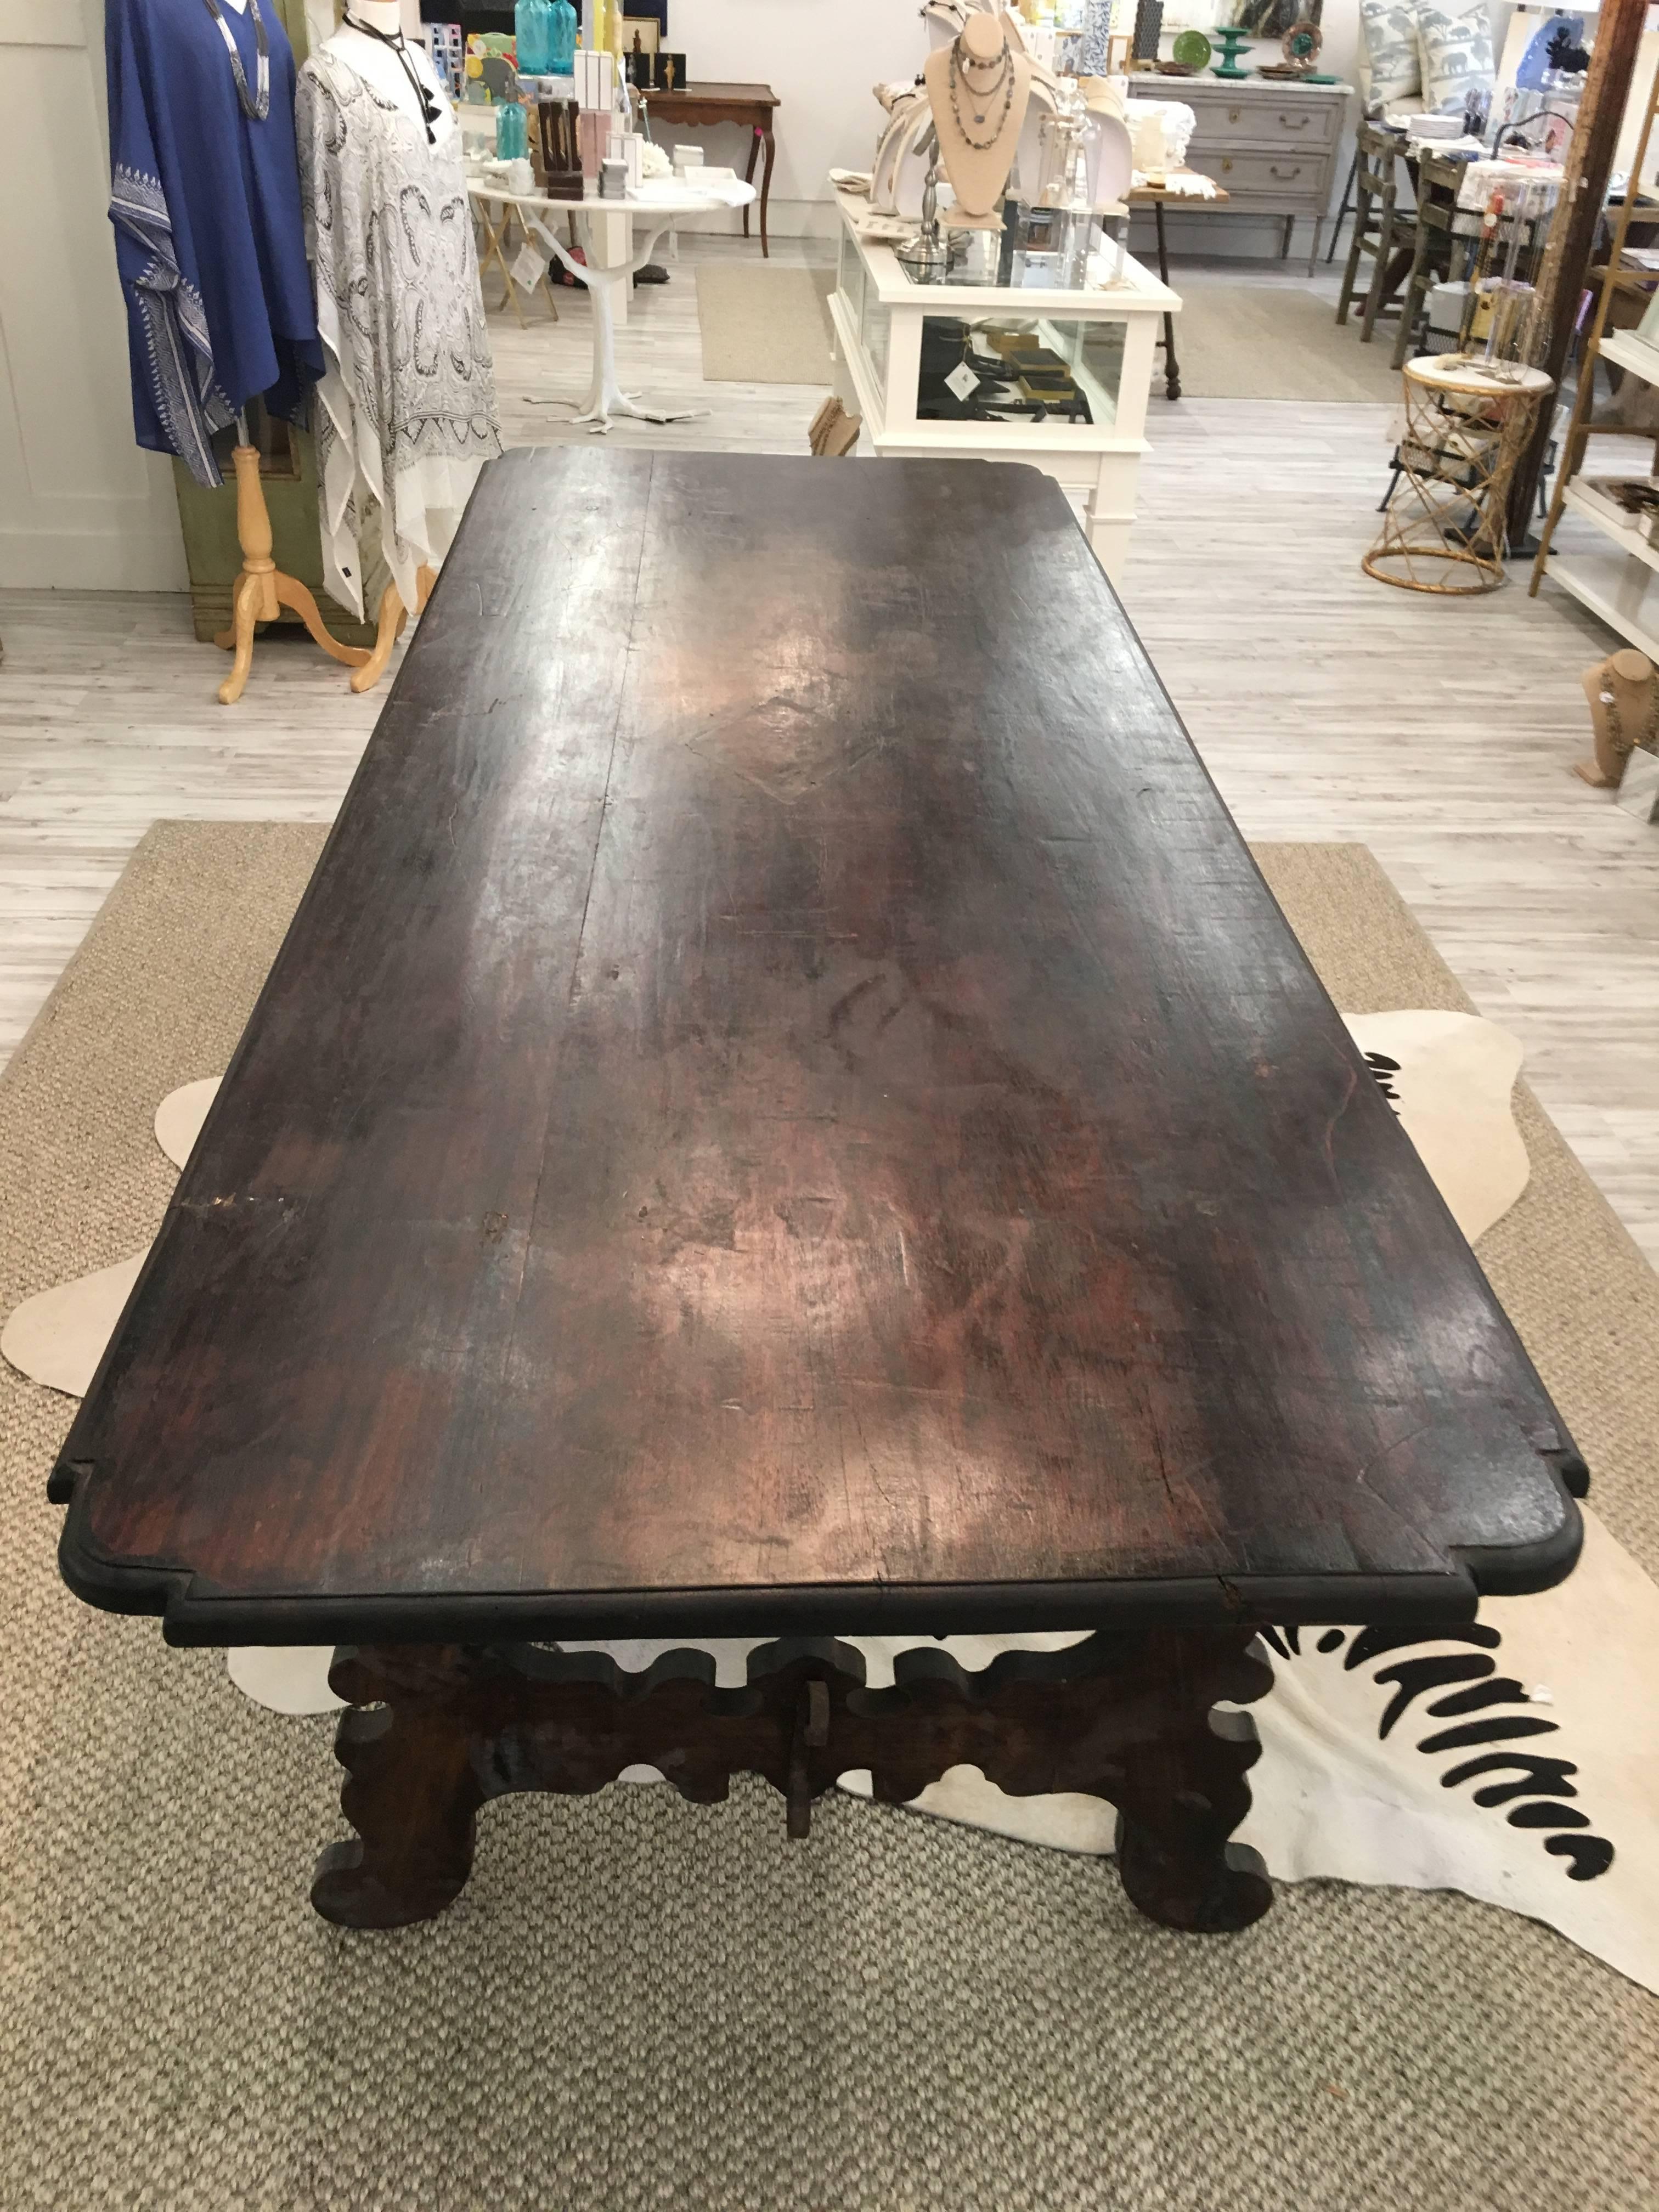 This Italian dining table from the late 19th century features a rectangular top with nicely carved rounded corners over an exquisite Baroque style trestle base with lyre shaped legs. Made of dark wood with wonderful lines, this fabulous table came